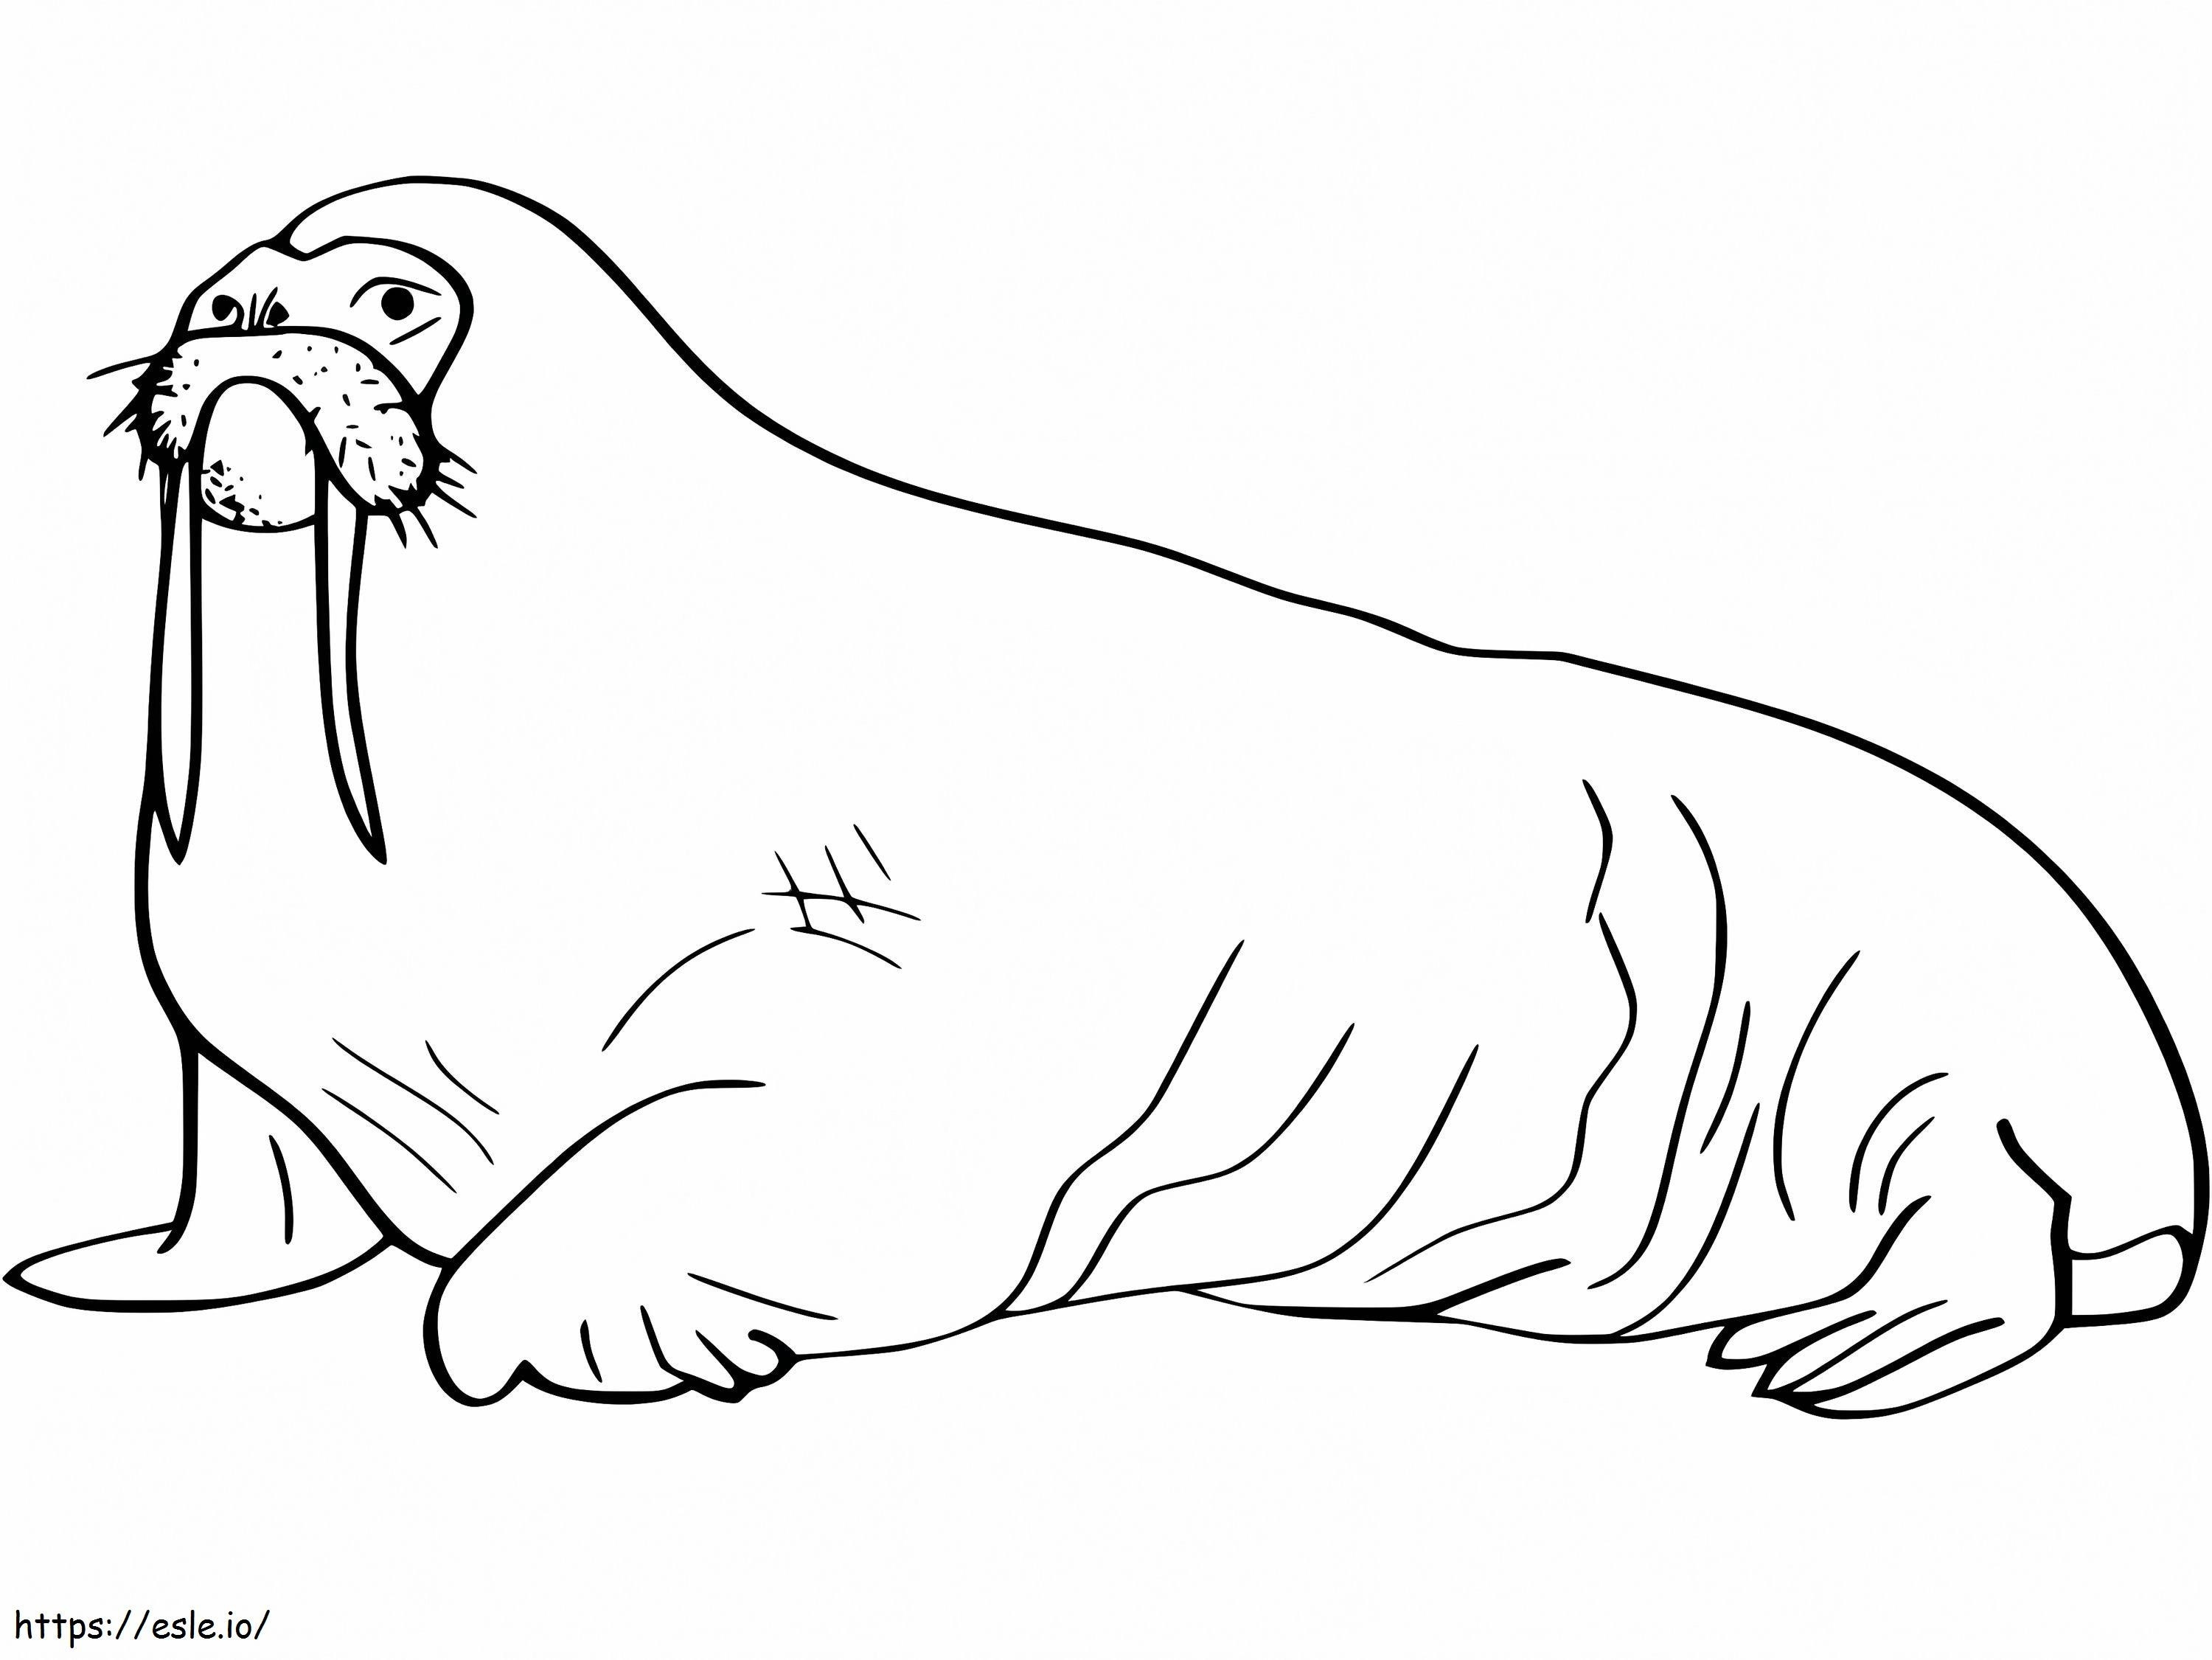 Walrus 22 coloring page